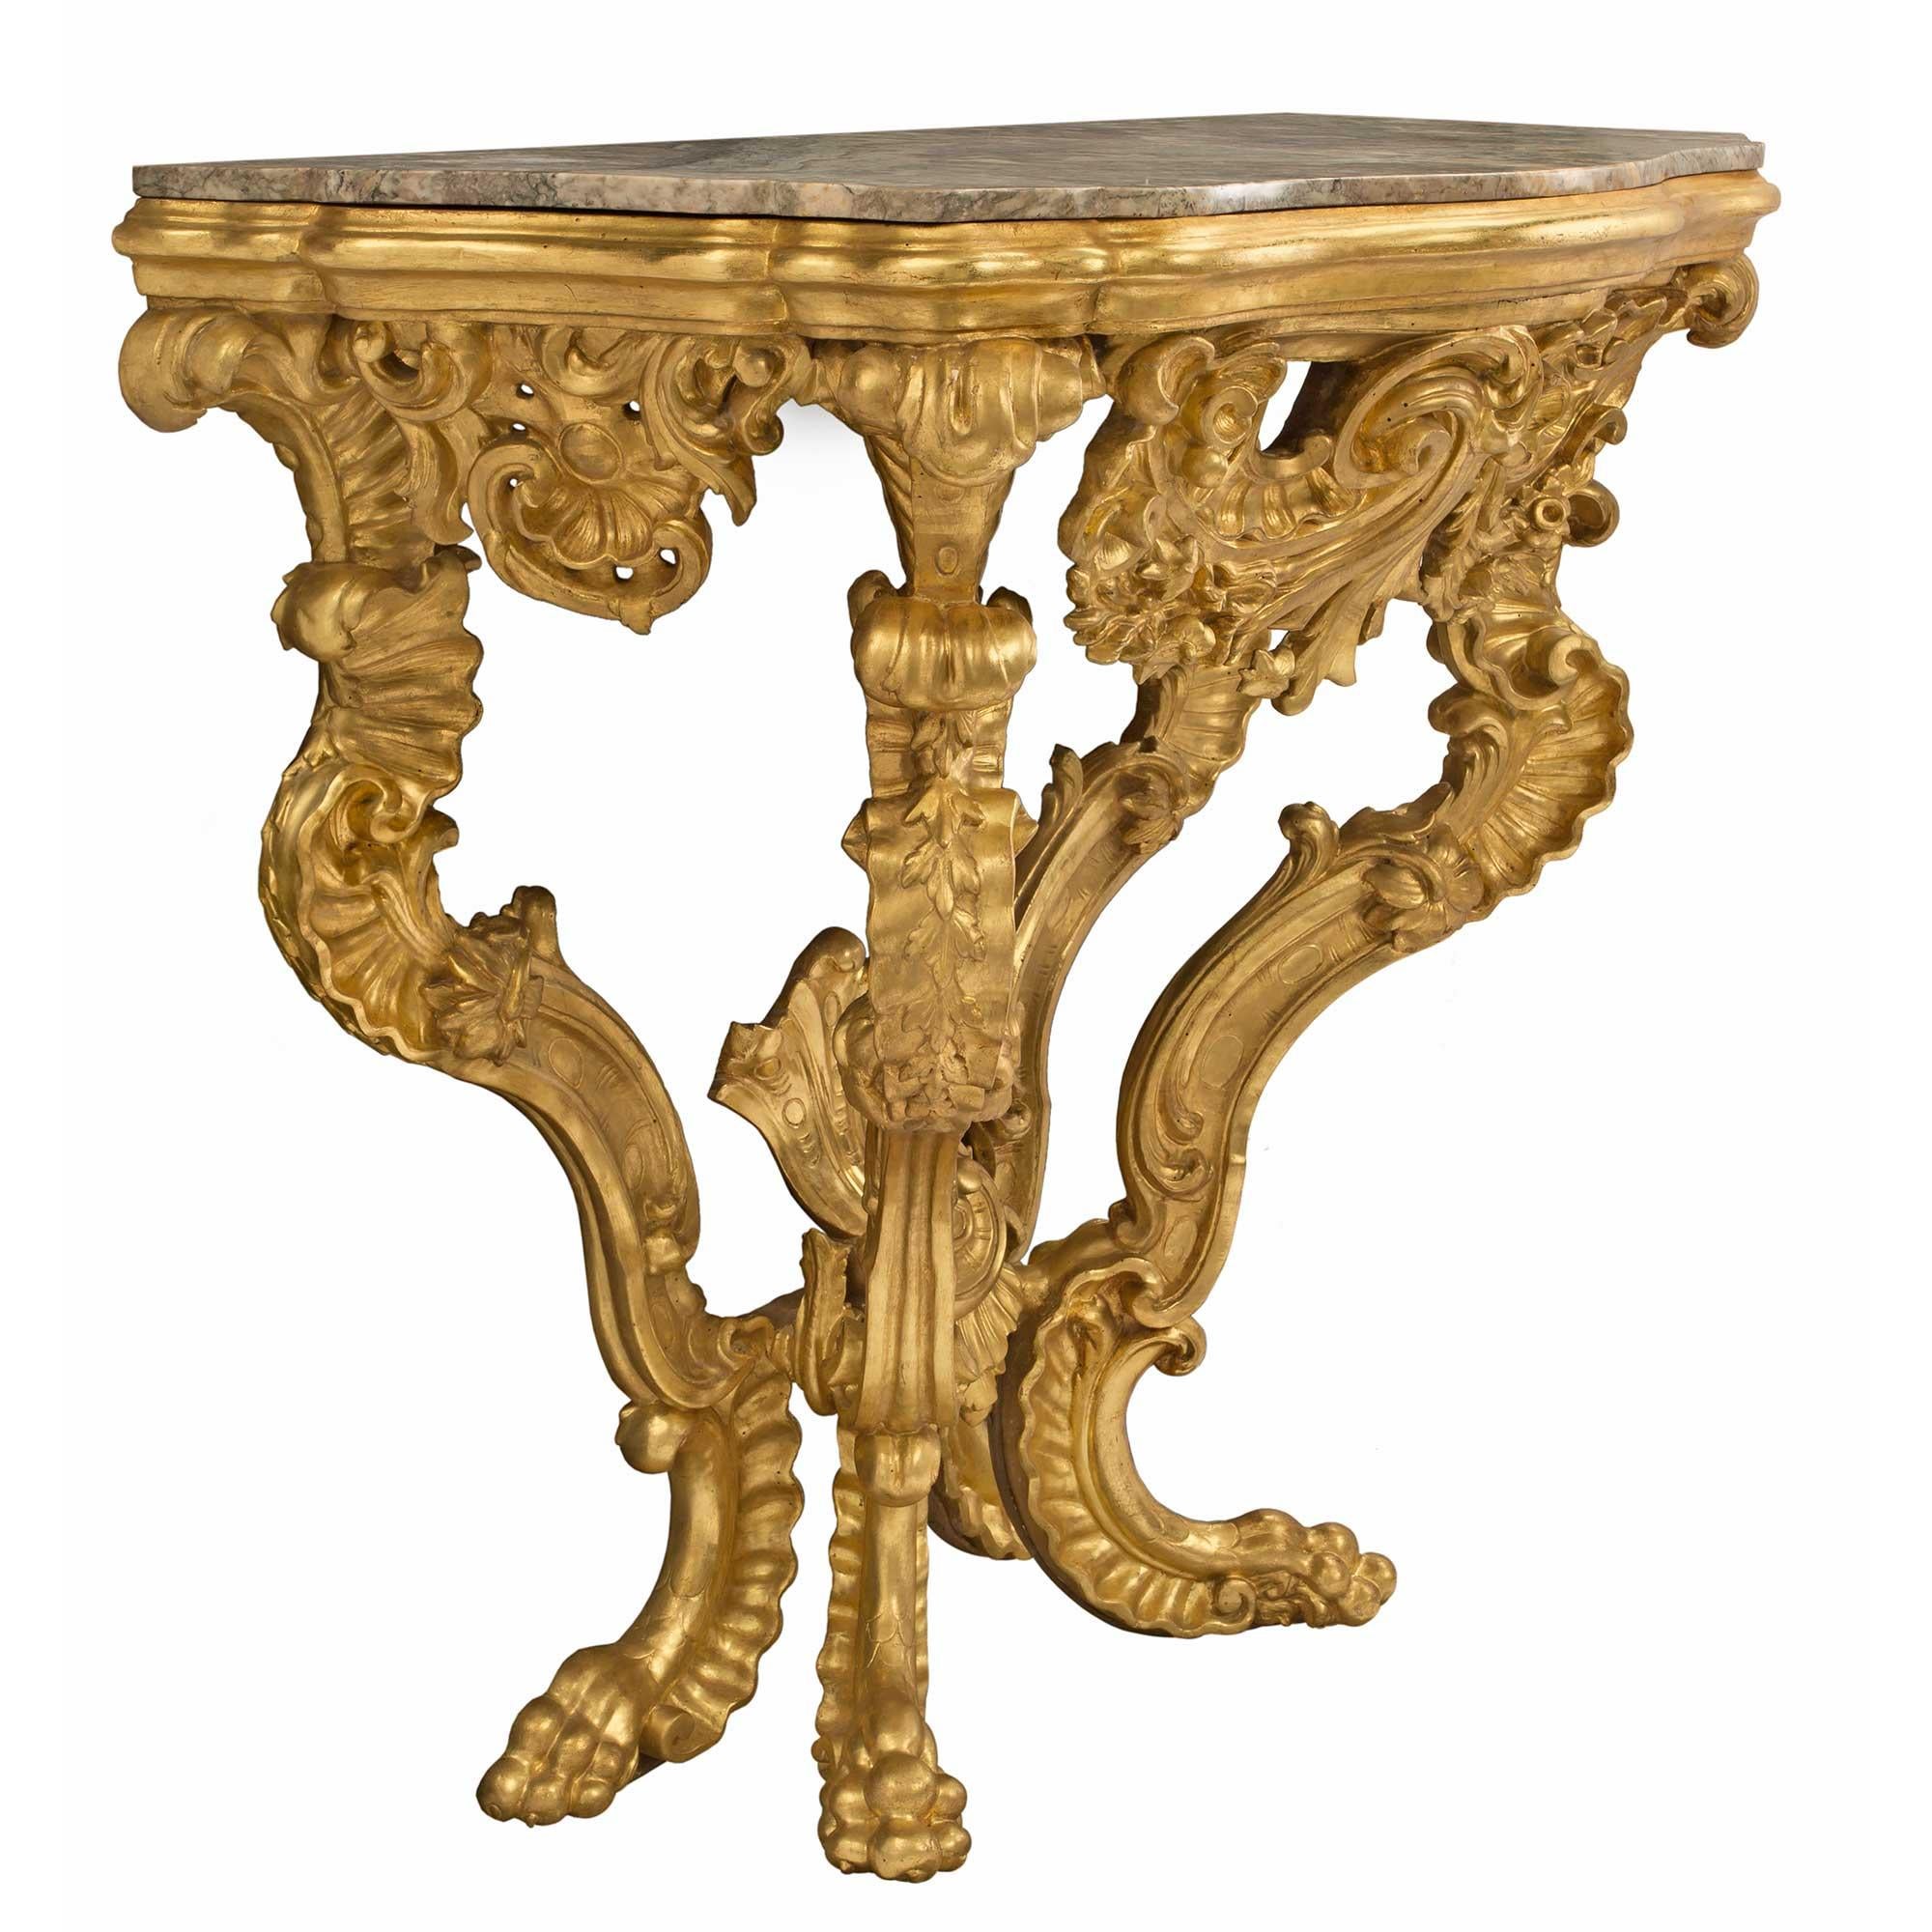 Pair of Italian 18th Century Baroque Giltwood and Marble Four Legged Consoles For Sale 1